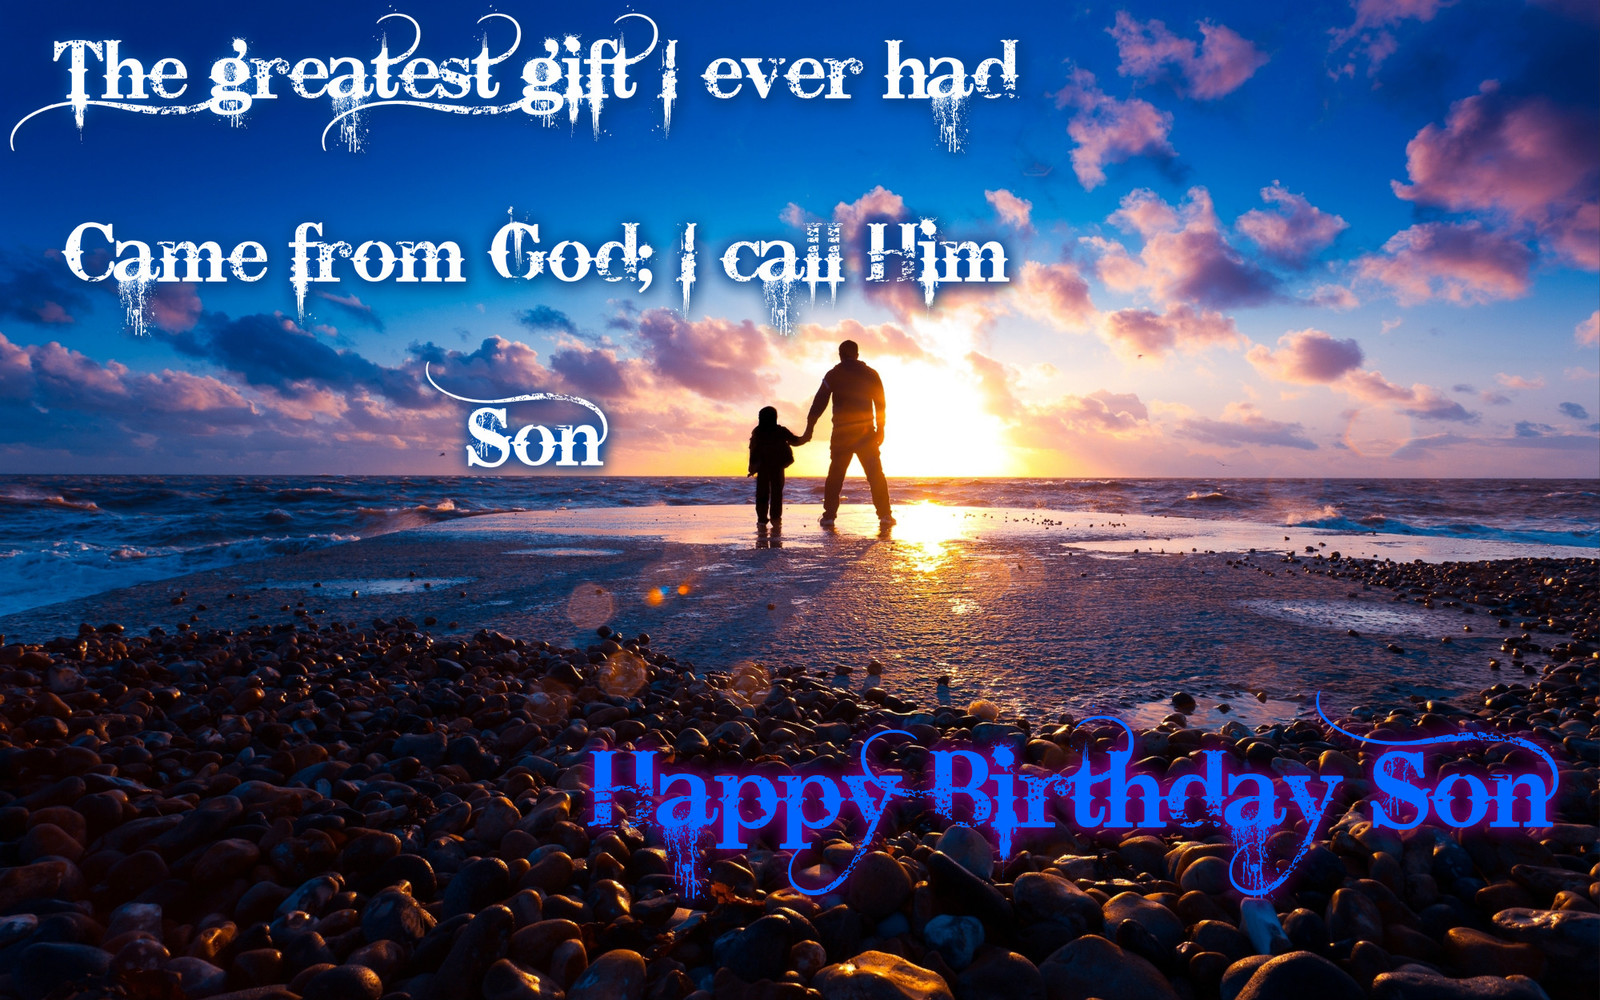 Father and son image quotes marathi happy birthday son wi...